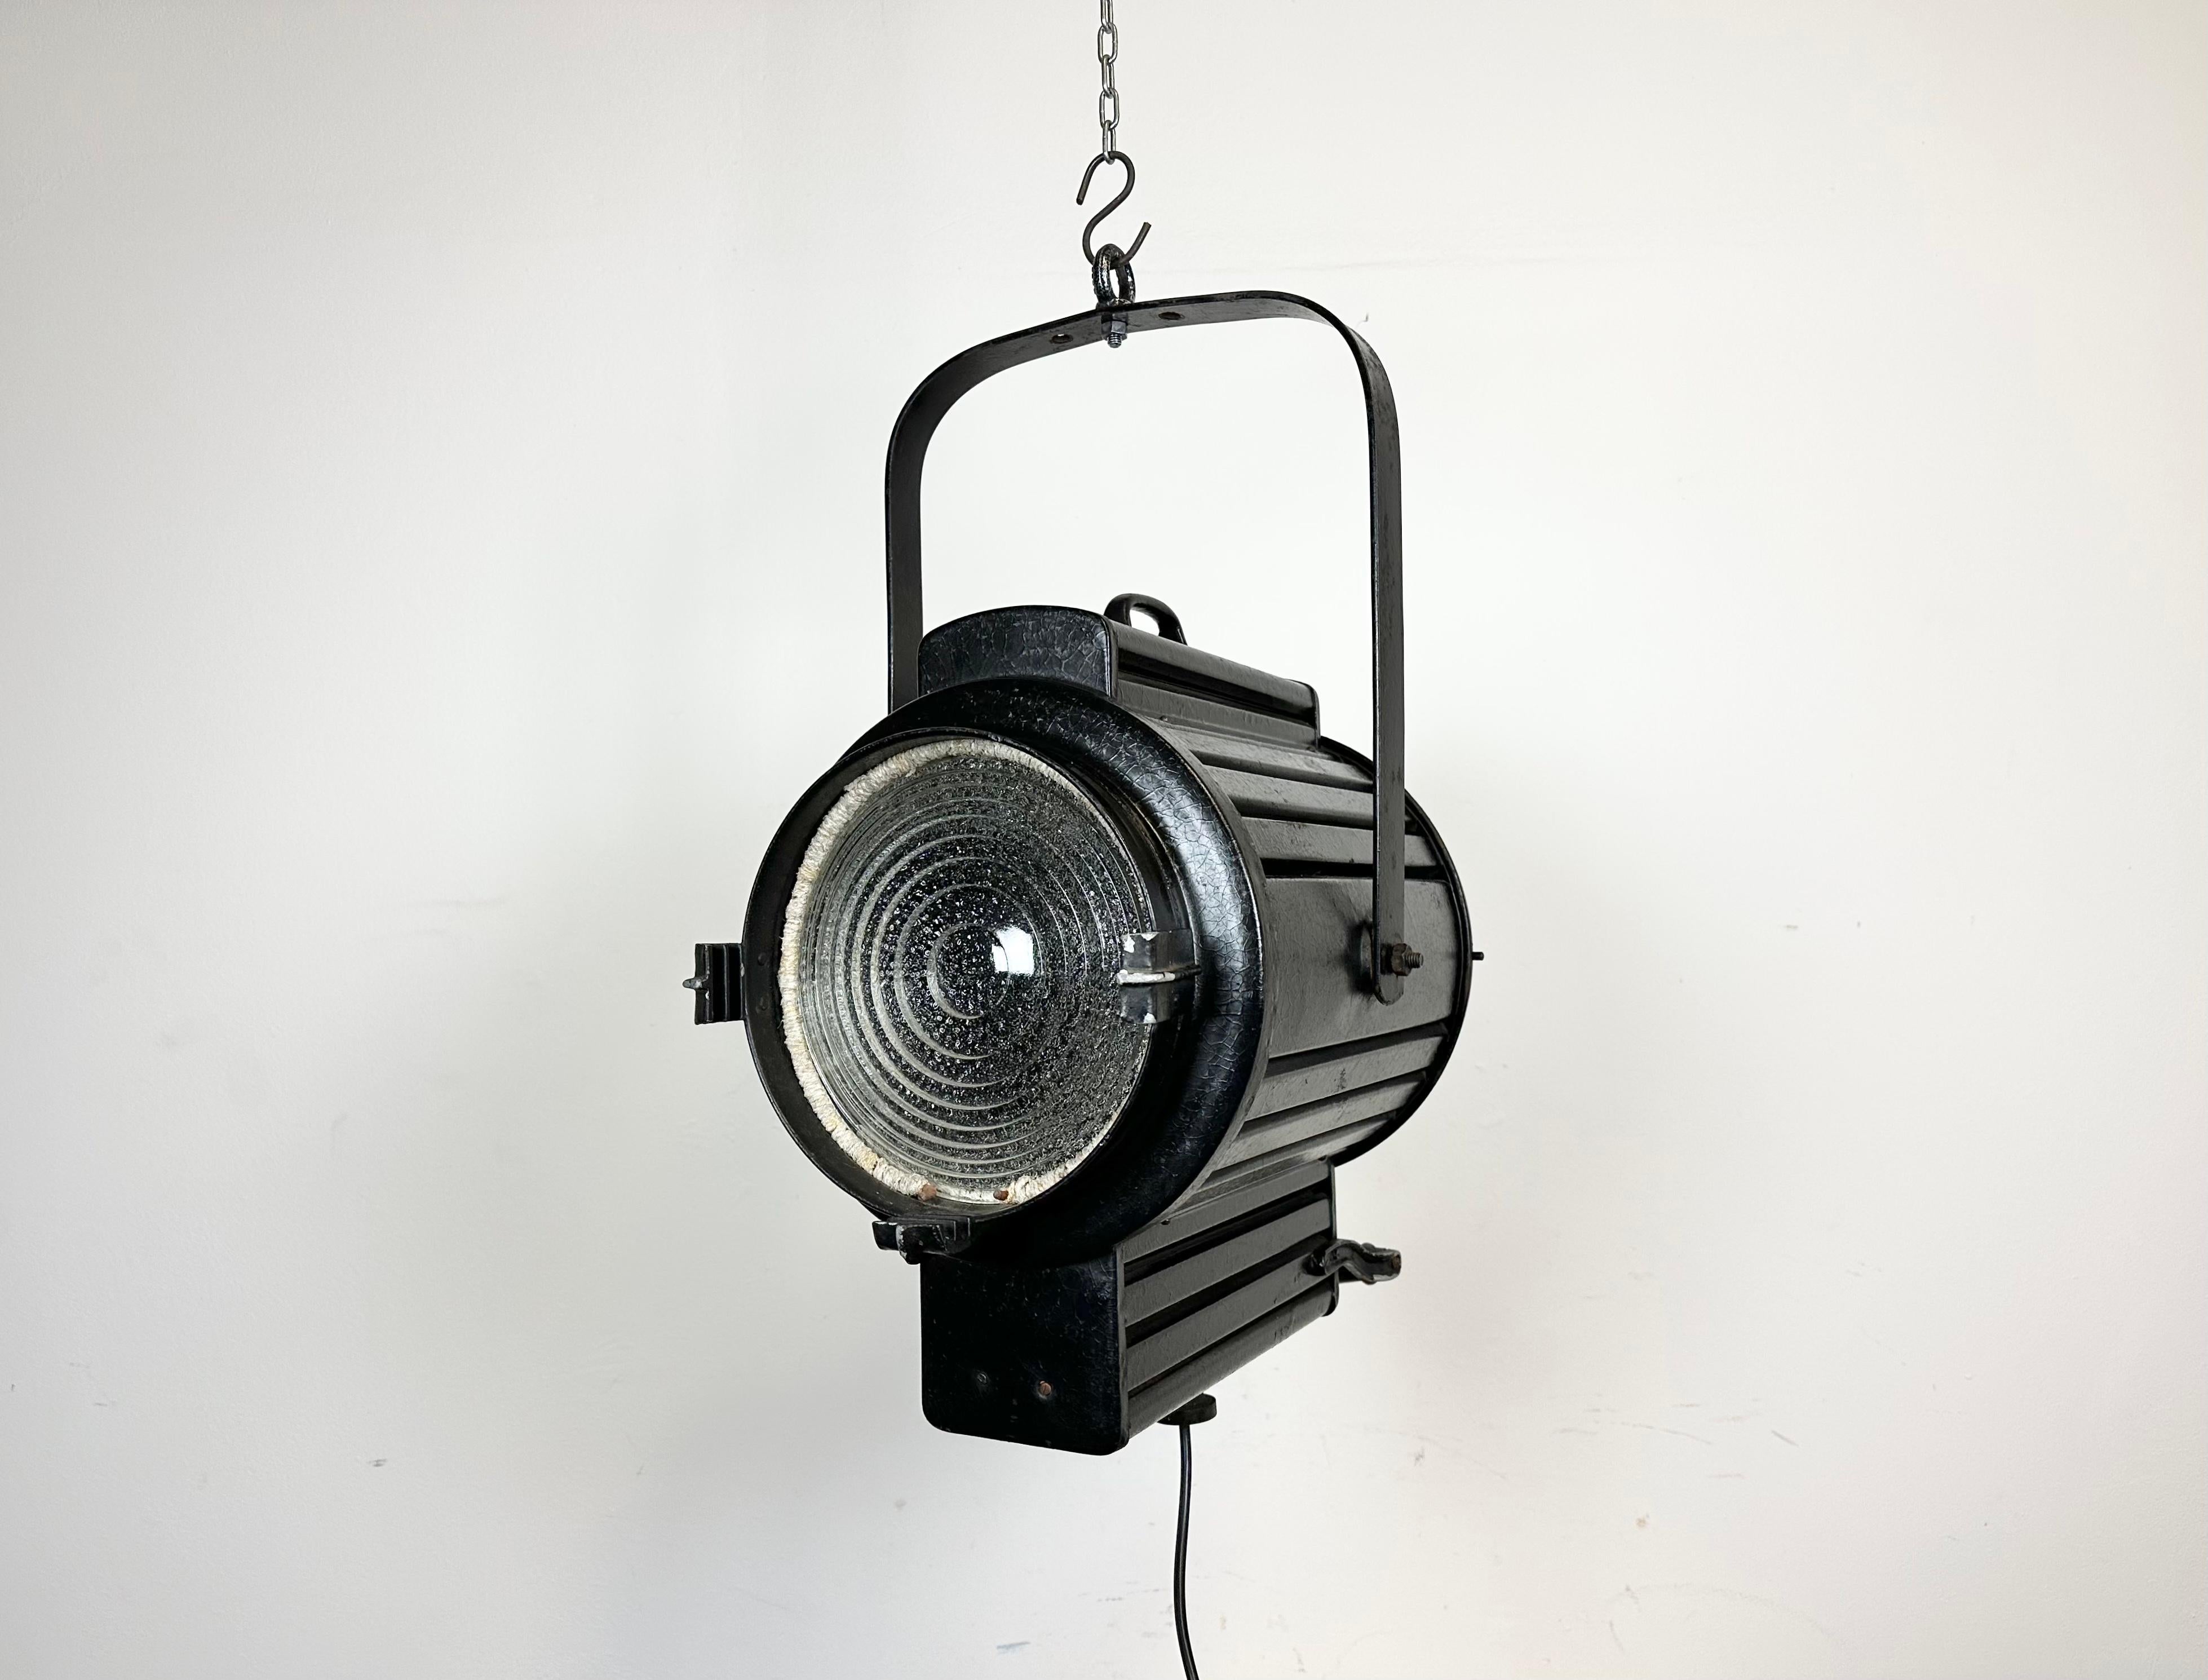 - Vintage theatre spotlight made in former Czechoslovakia during the 1960s 
- It features a black metal body and clear glass lens cover
- The porcelain socket requires E27/ E26 lightbulbs 
- New wire
-The height of the spotlight is 40 cm. With